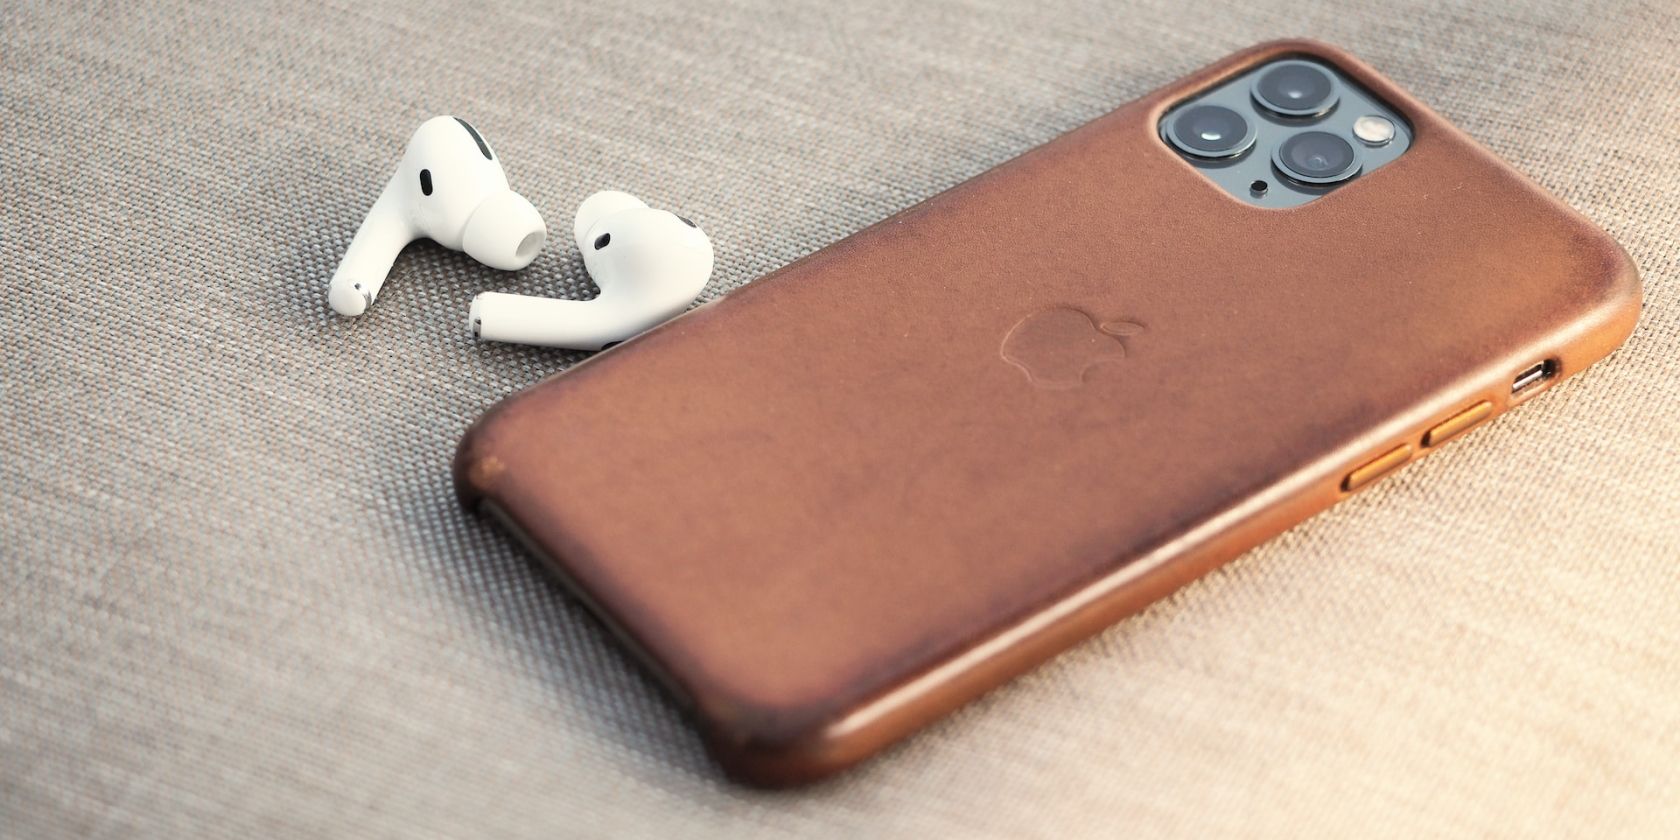 AirPods Pro next to an iPhone in a leather case